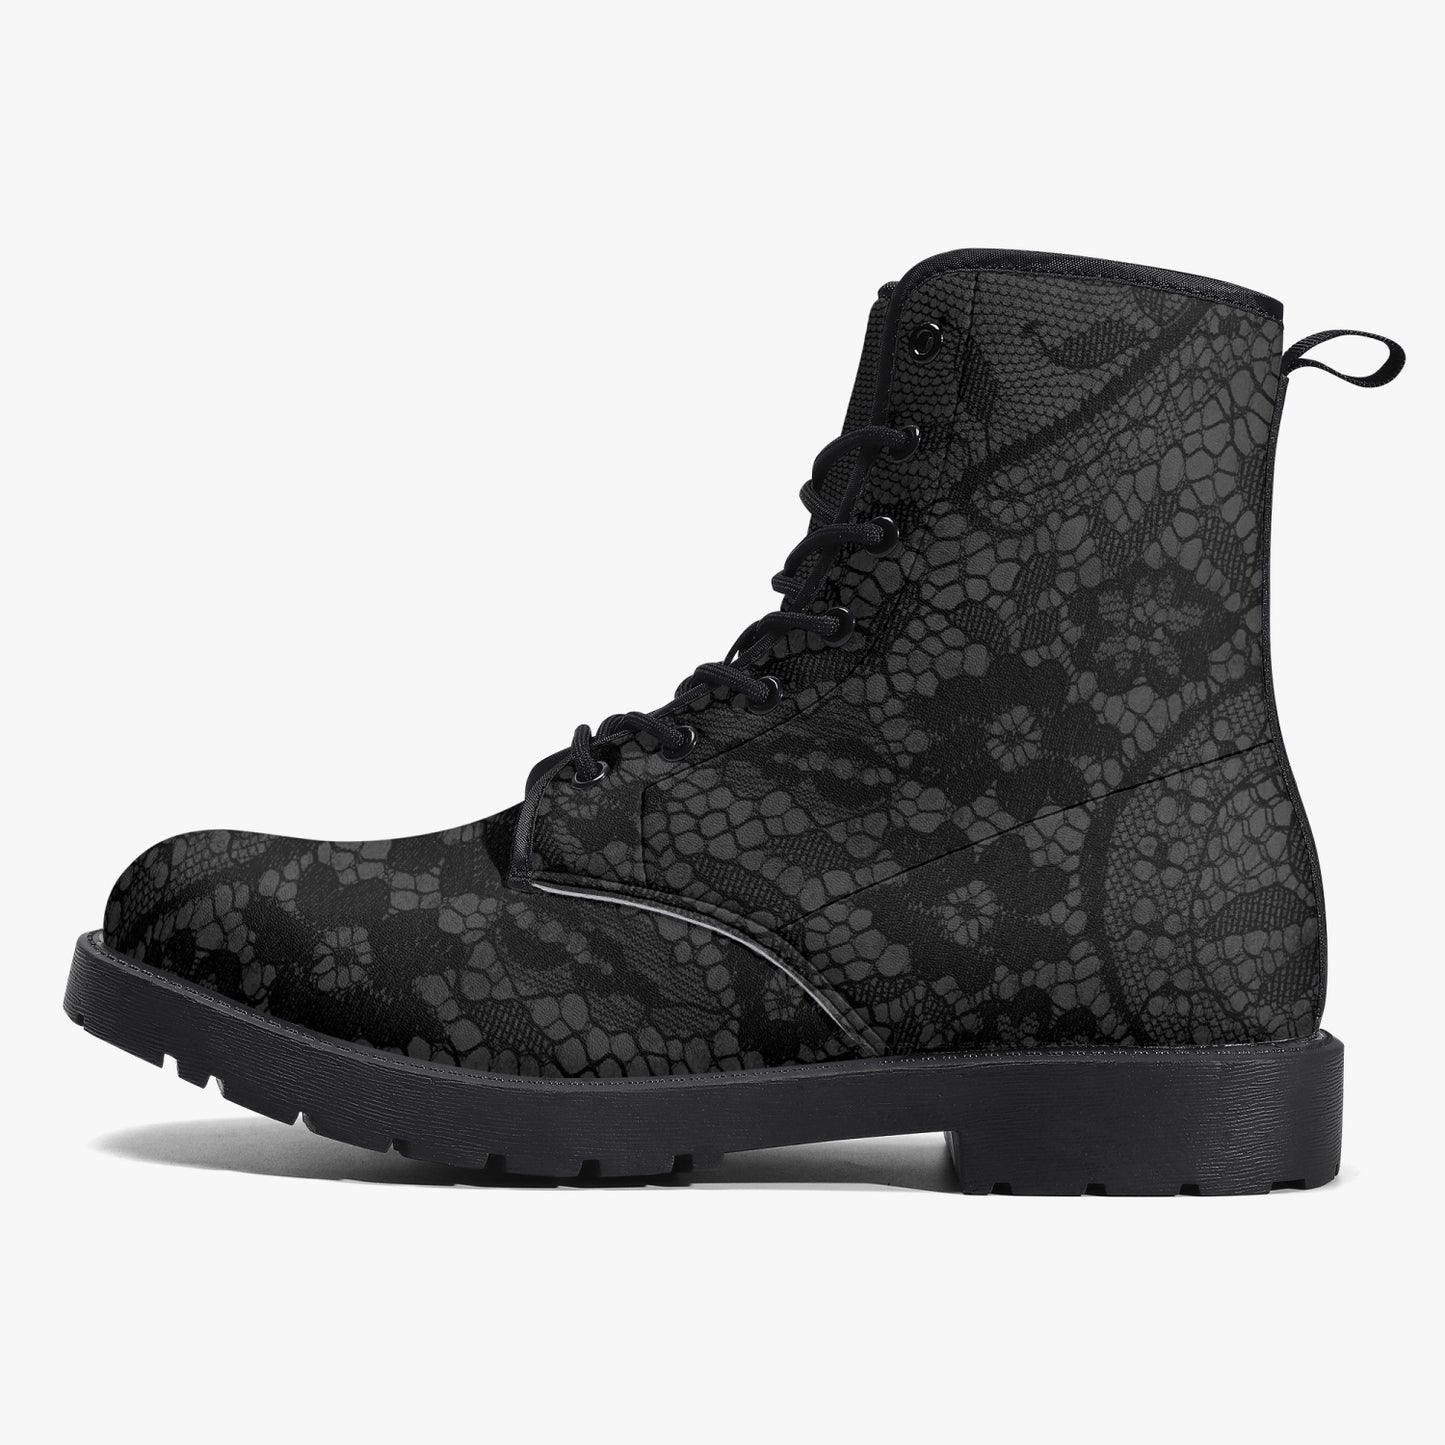 Gothic Grey and Black Lace Vegan leather Combat Boots - Vegan Leather Goth Boots (JPREG81)